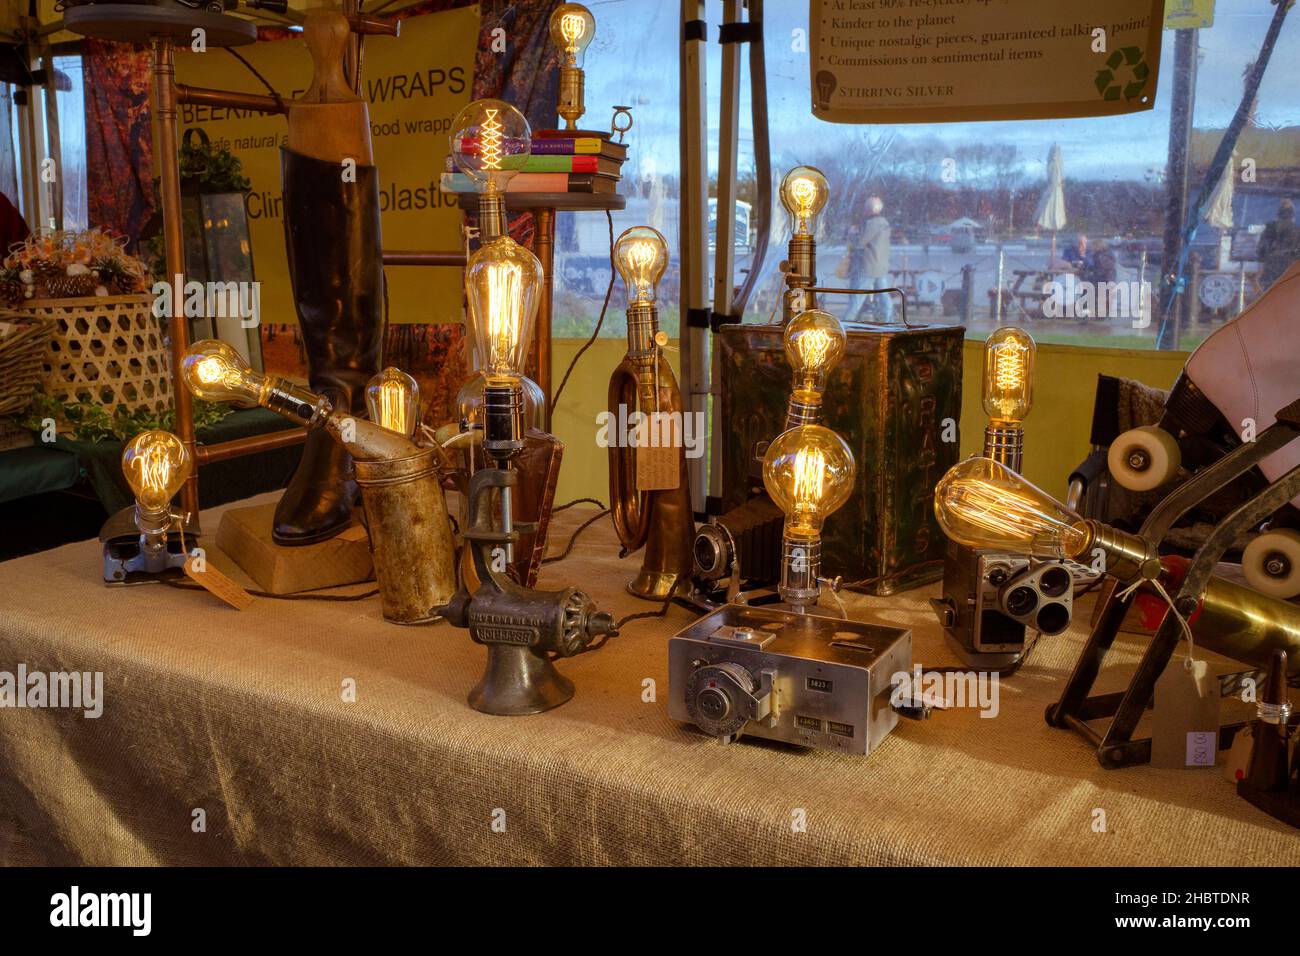 Stratford upon Avon, UK - A selection of steam punk inspired lighting for sale at the Victorian Christmas market. Stock Photo